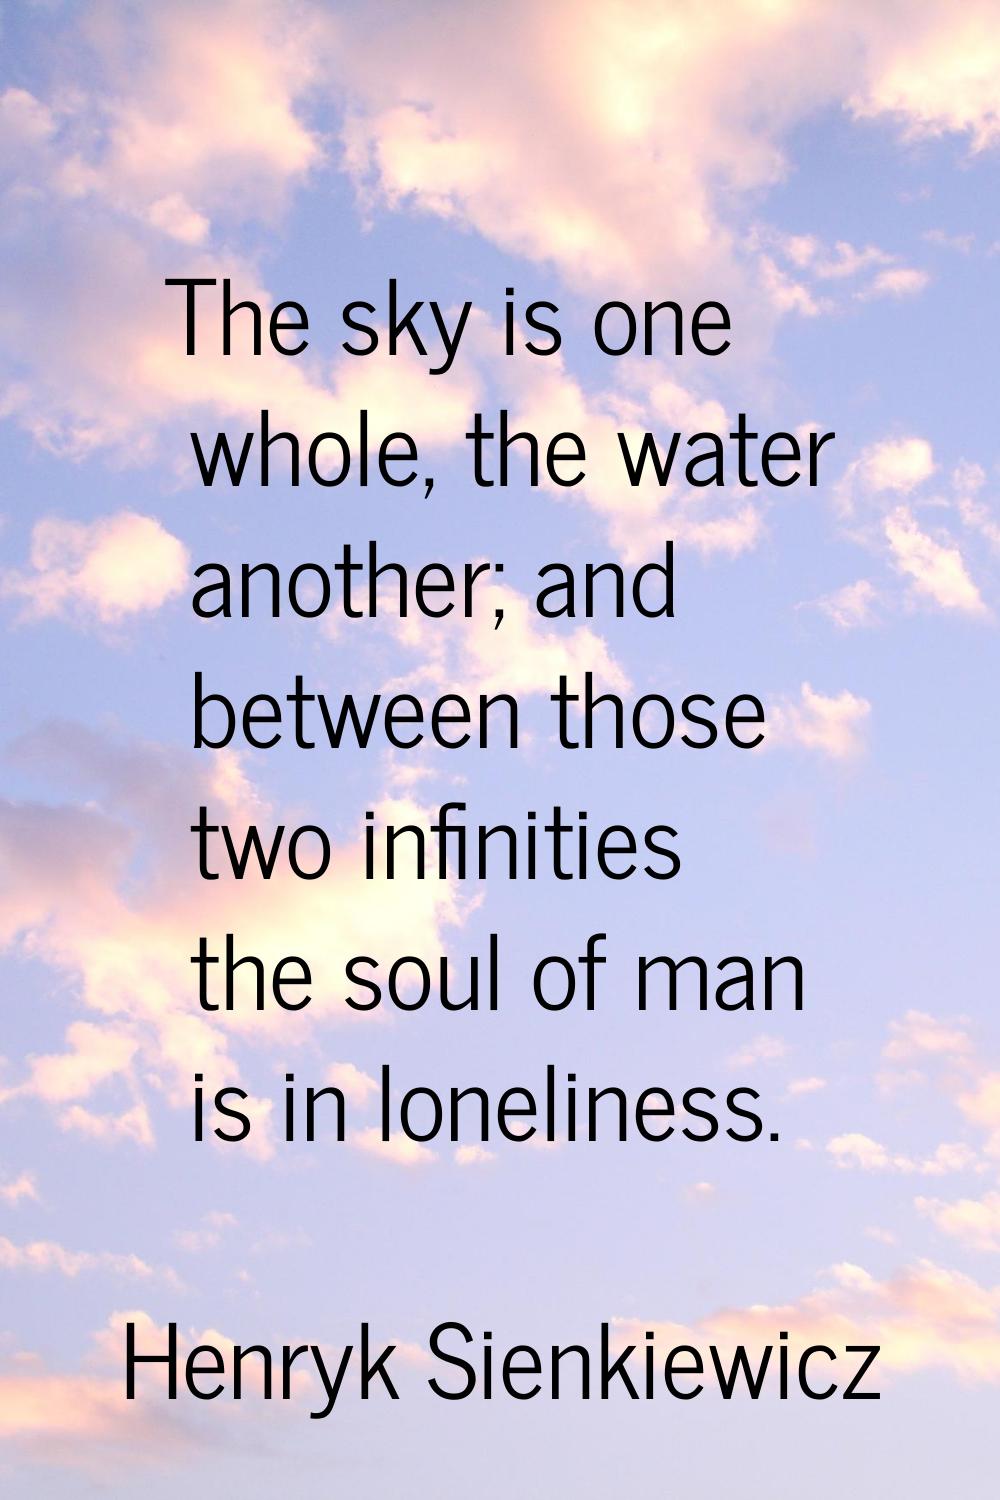 The sky is one whole, the water another; and between those two infinities the soul of man is in lon